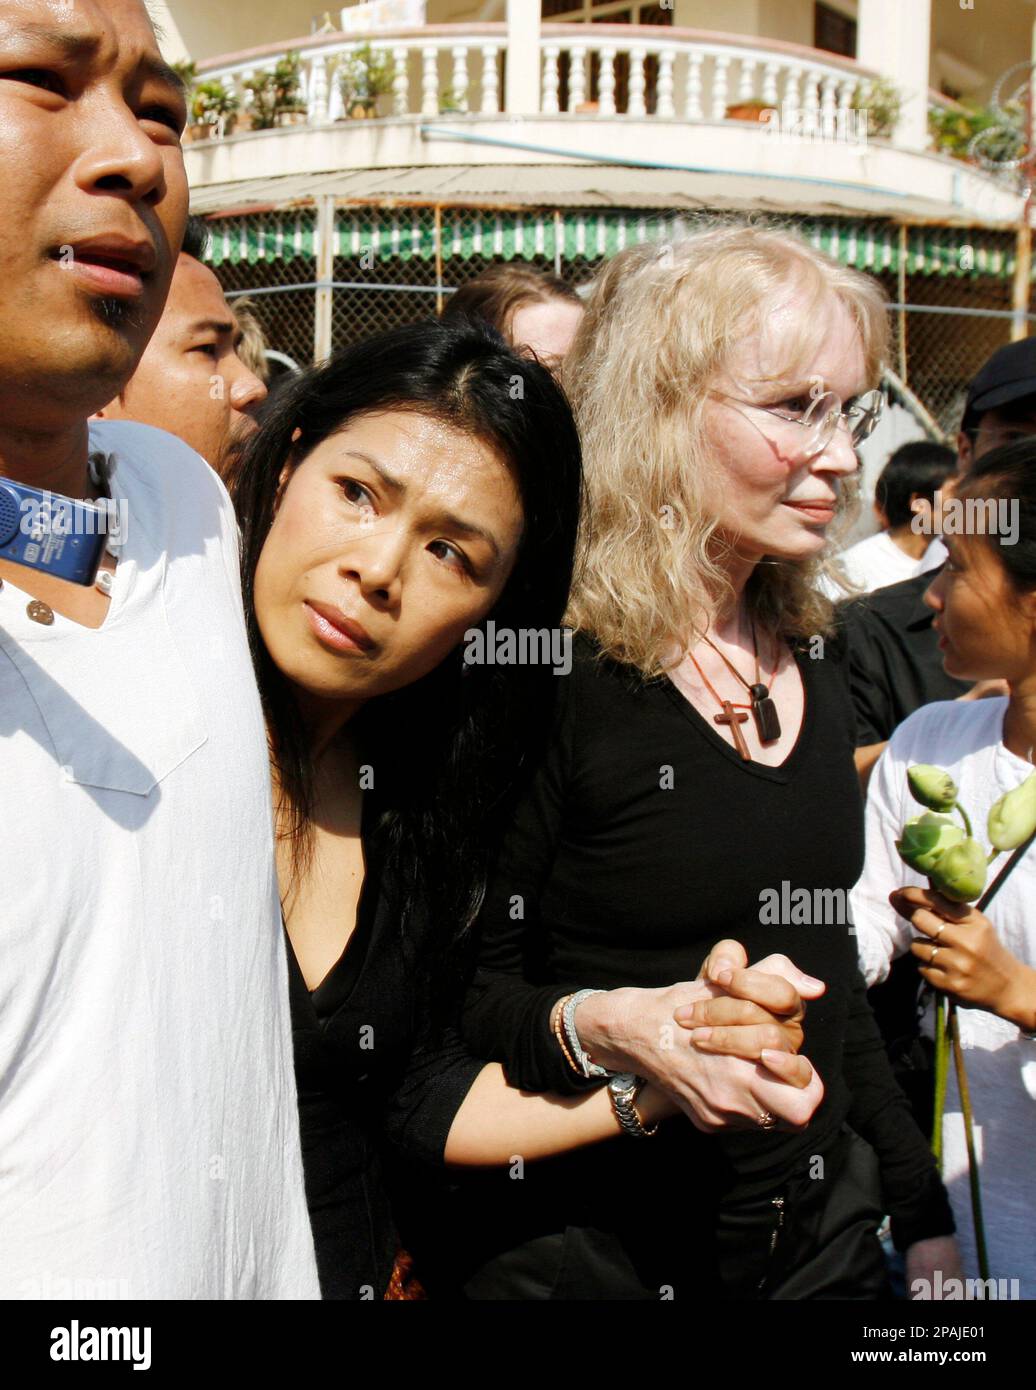 American actress Mia Farrow, right, and Cambodian Executive Director of the Center for Social Development, Theary Seng, left, move away after police pushing their group outside Tuol Sleng genocide museum in Phnom Penh, Cambodia, Sunday, Jan. 20, 2008. Cambodian police blocked American actress Mia Farrow from holding a genocide memorial ceremony Sunday at a Khmer Rouge prison, at one point forcefully pushing her group away from a barricade. (AP Photo/Heng Sinith) Stock Photo